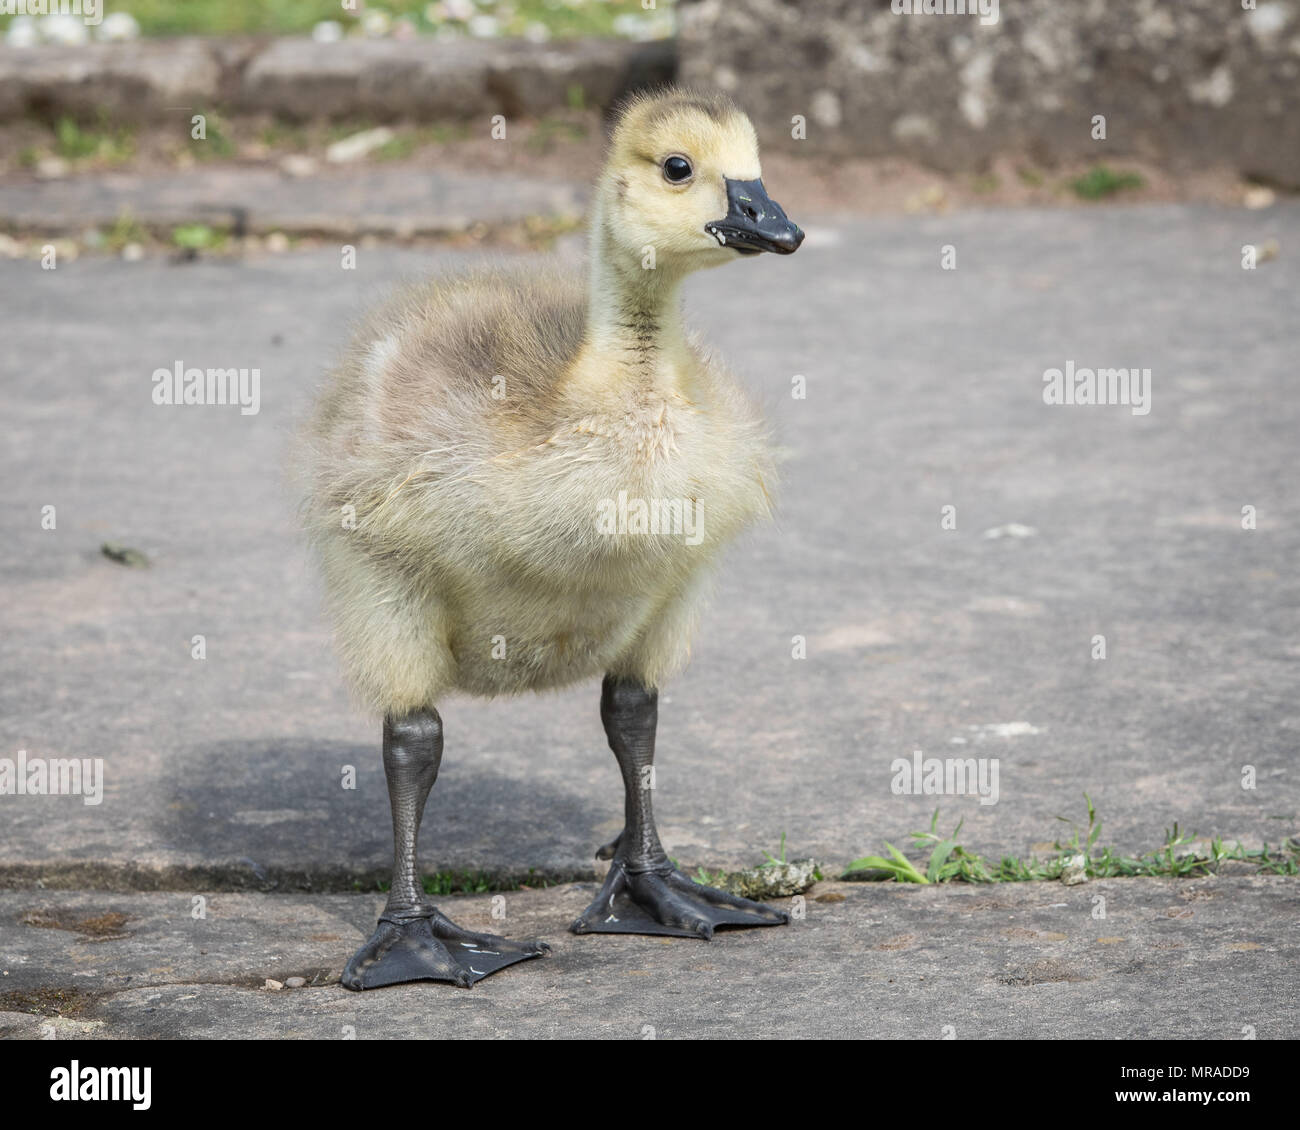 Clumber Park, Worksop, Nottinghamshire, UK. Saturday 26th May 2018. A fluffy Gosling searches for food on a warm day at Clumber Park, Worksop, Nottinghamshire. Stock Photo